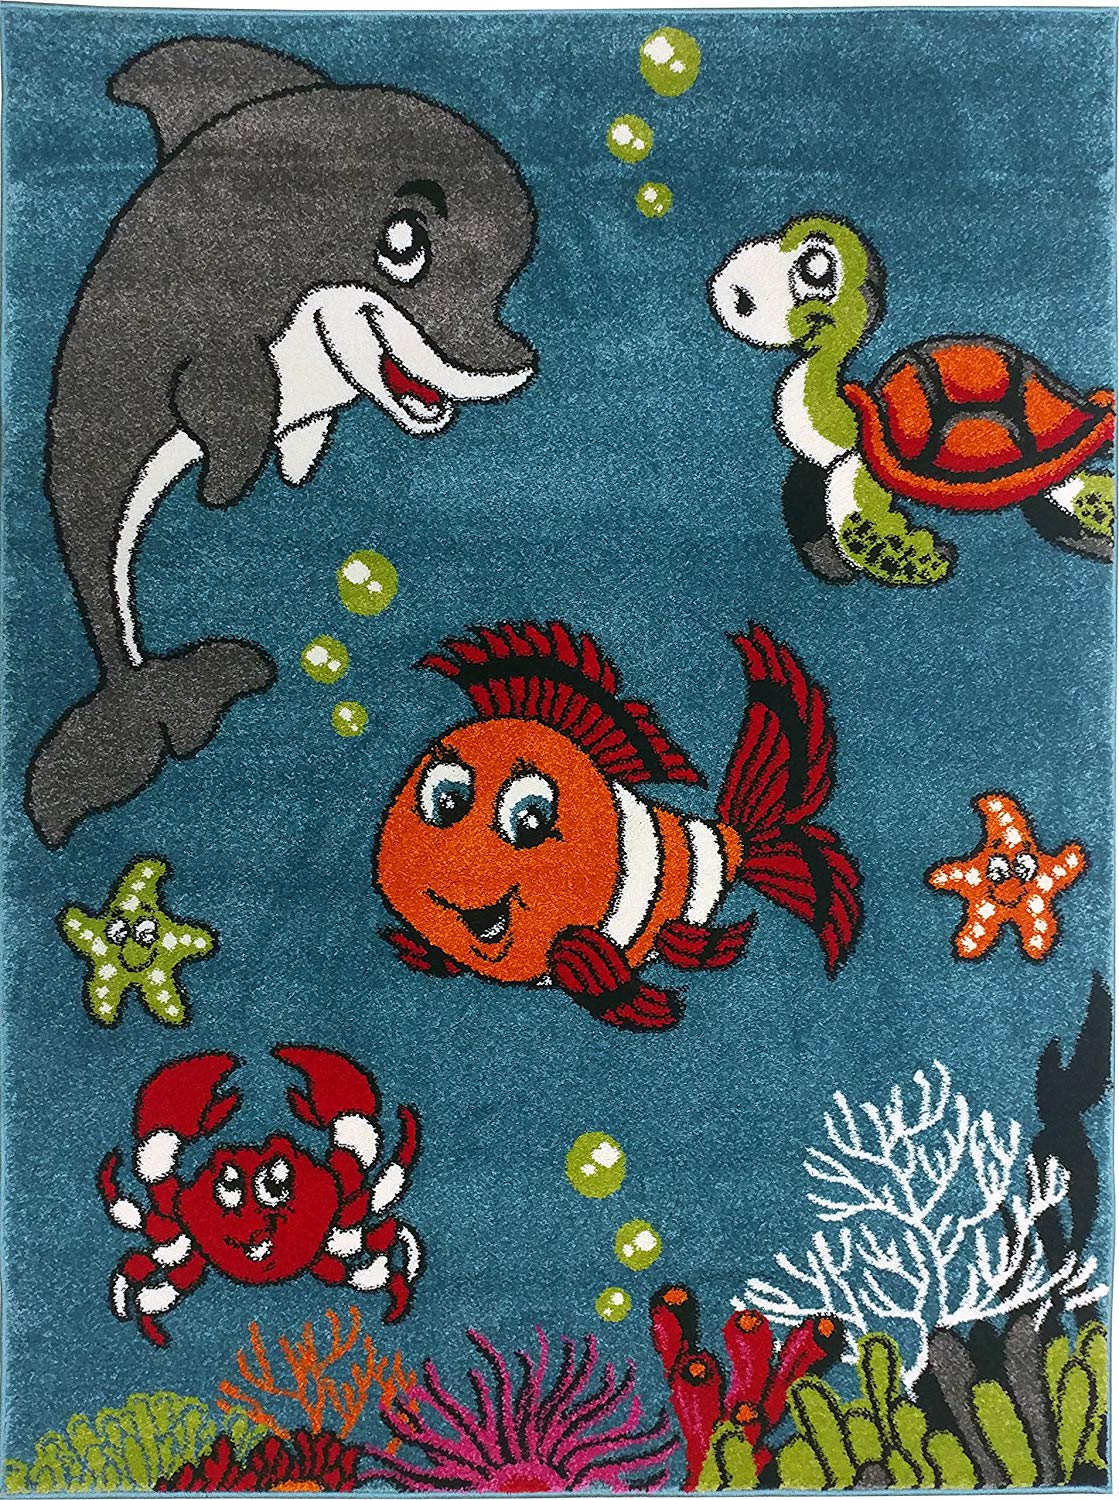 KC CUBS Boy and Girl Bedroom Modern Decor Pink Blue White Area Rug and Carpet Collection For Kids and Children (5' 3" x 7' 3", Clown Fish & Sea School Friends)